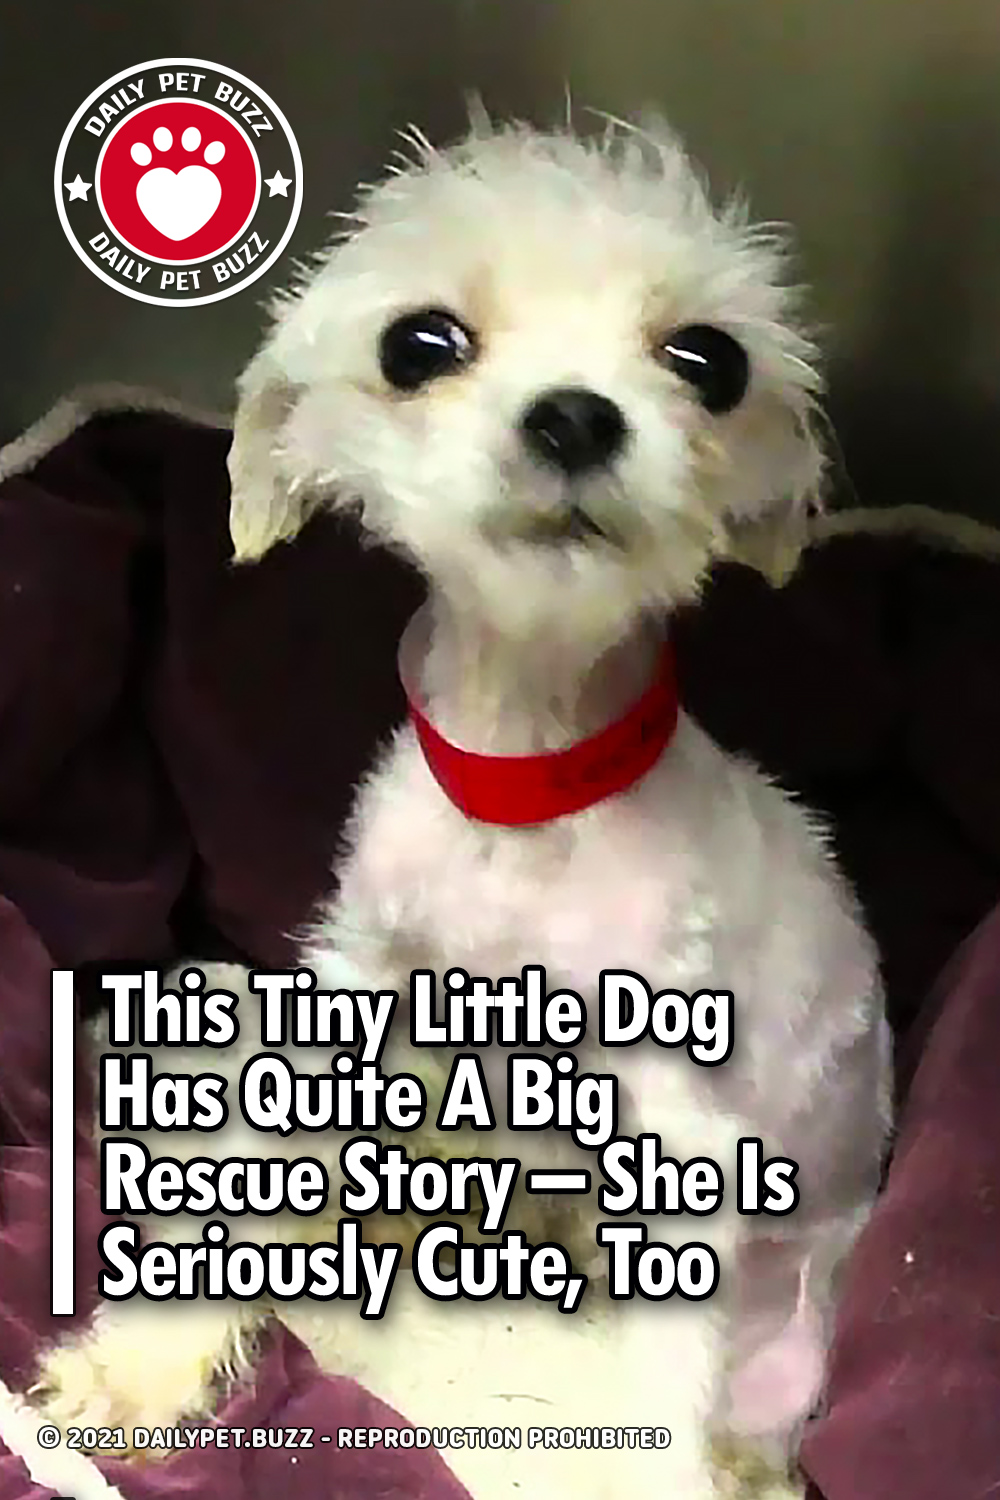 This Tiny Little Dog Has Quite A Big Rescue Story – She Is Seriously Cute, Too